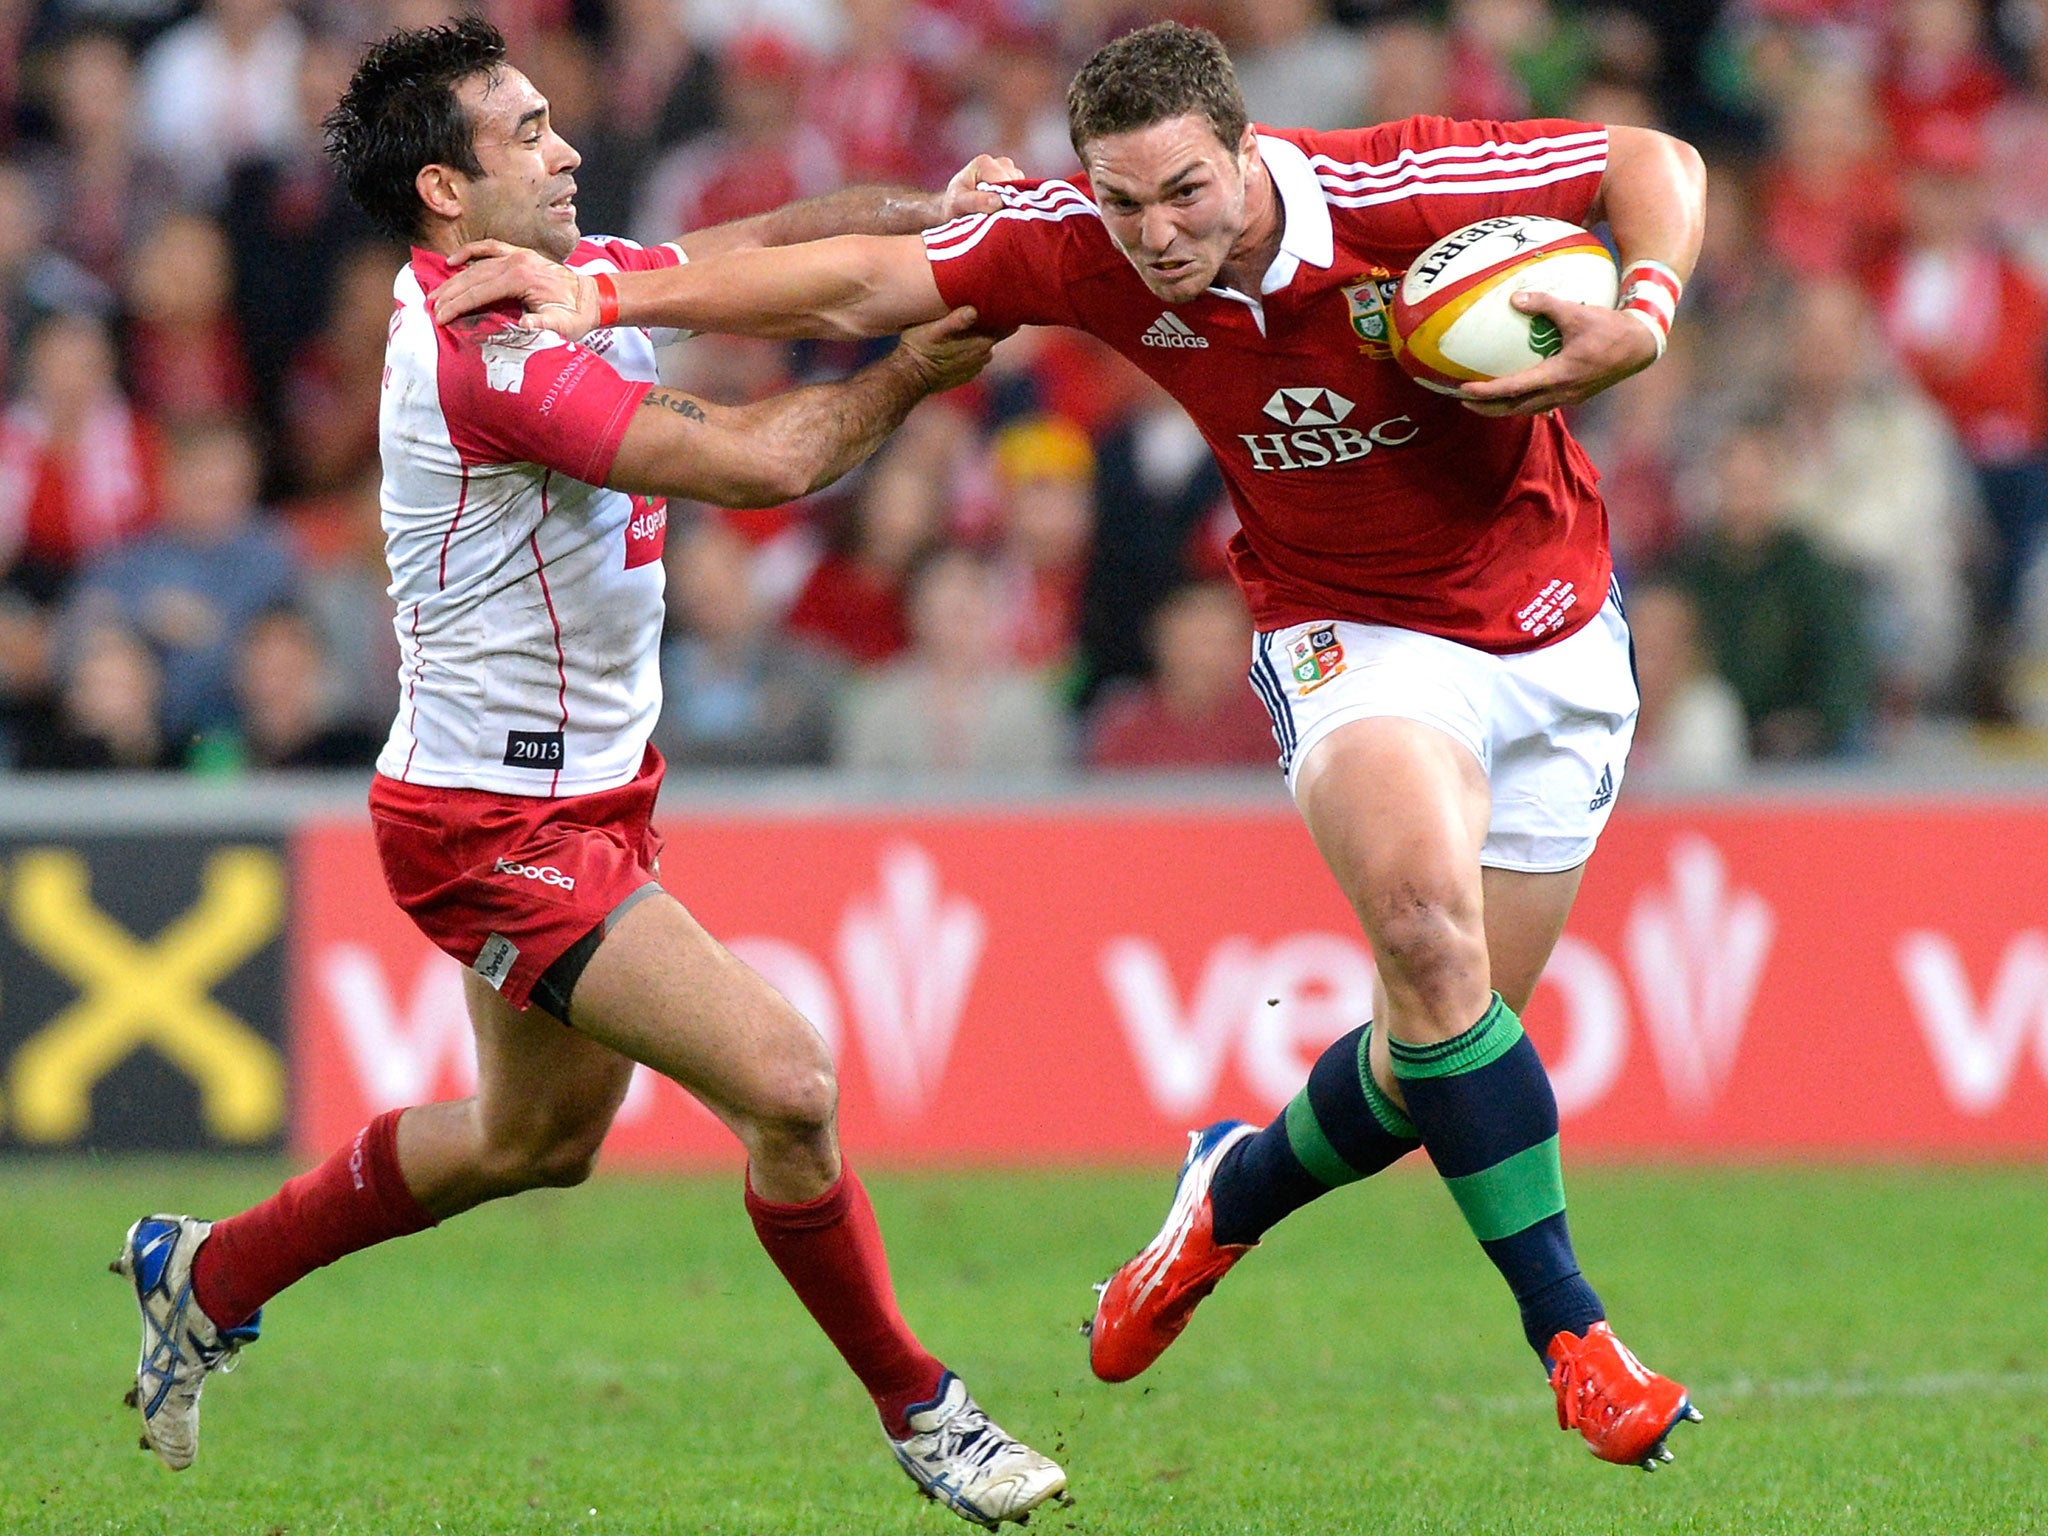 George North, a favourite for Test selection, in action against the Queensland Reds